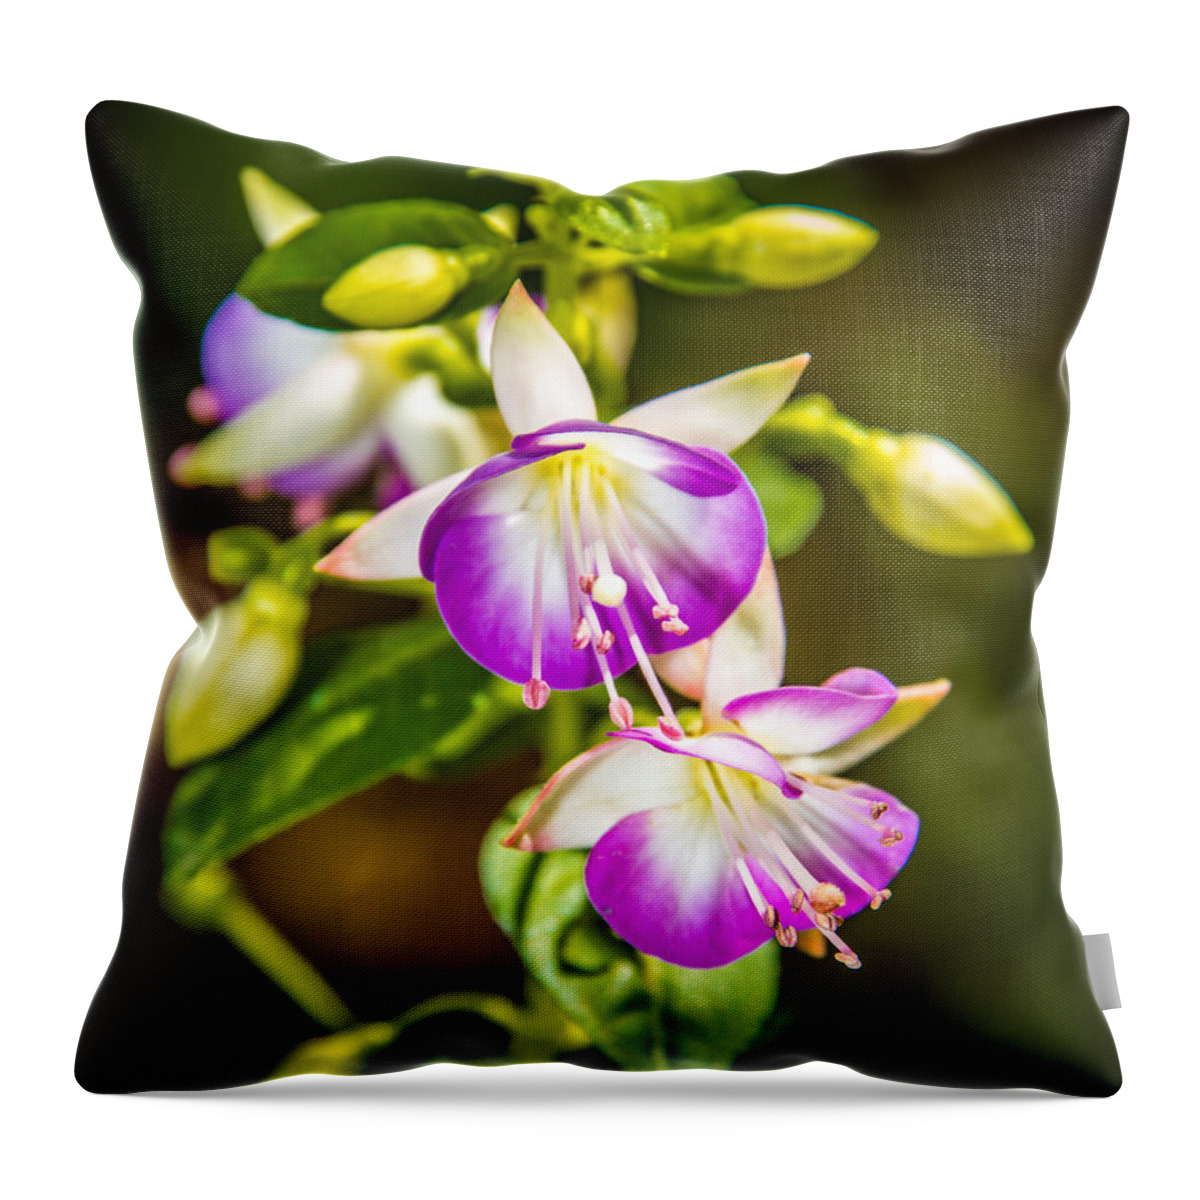 Flowers Throw Pillow featuring the photograph Purple Glow by Jerry Cahill